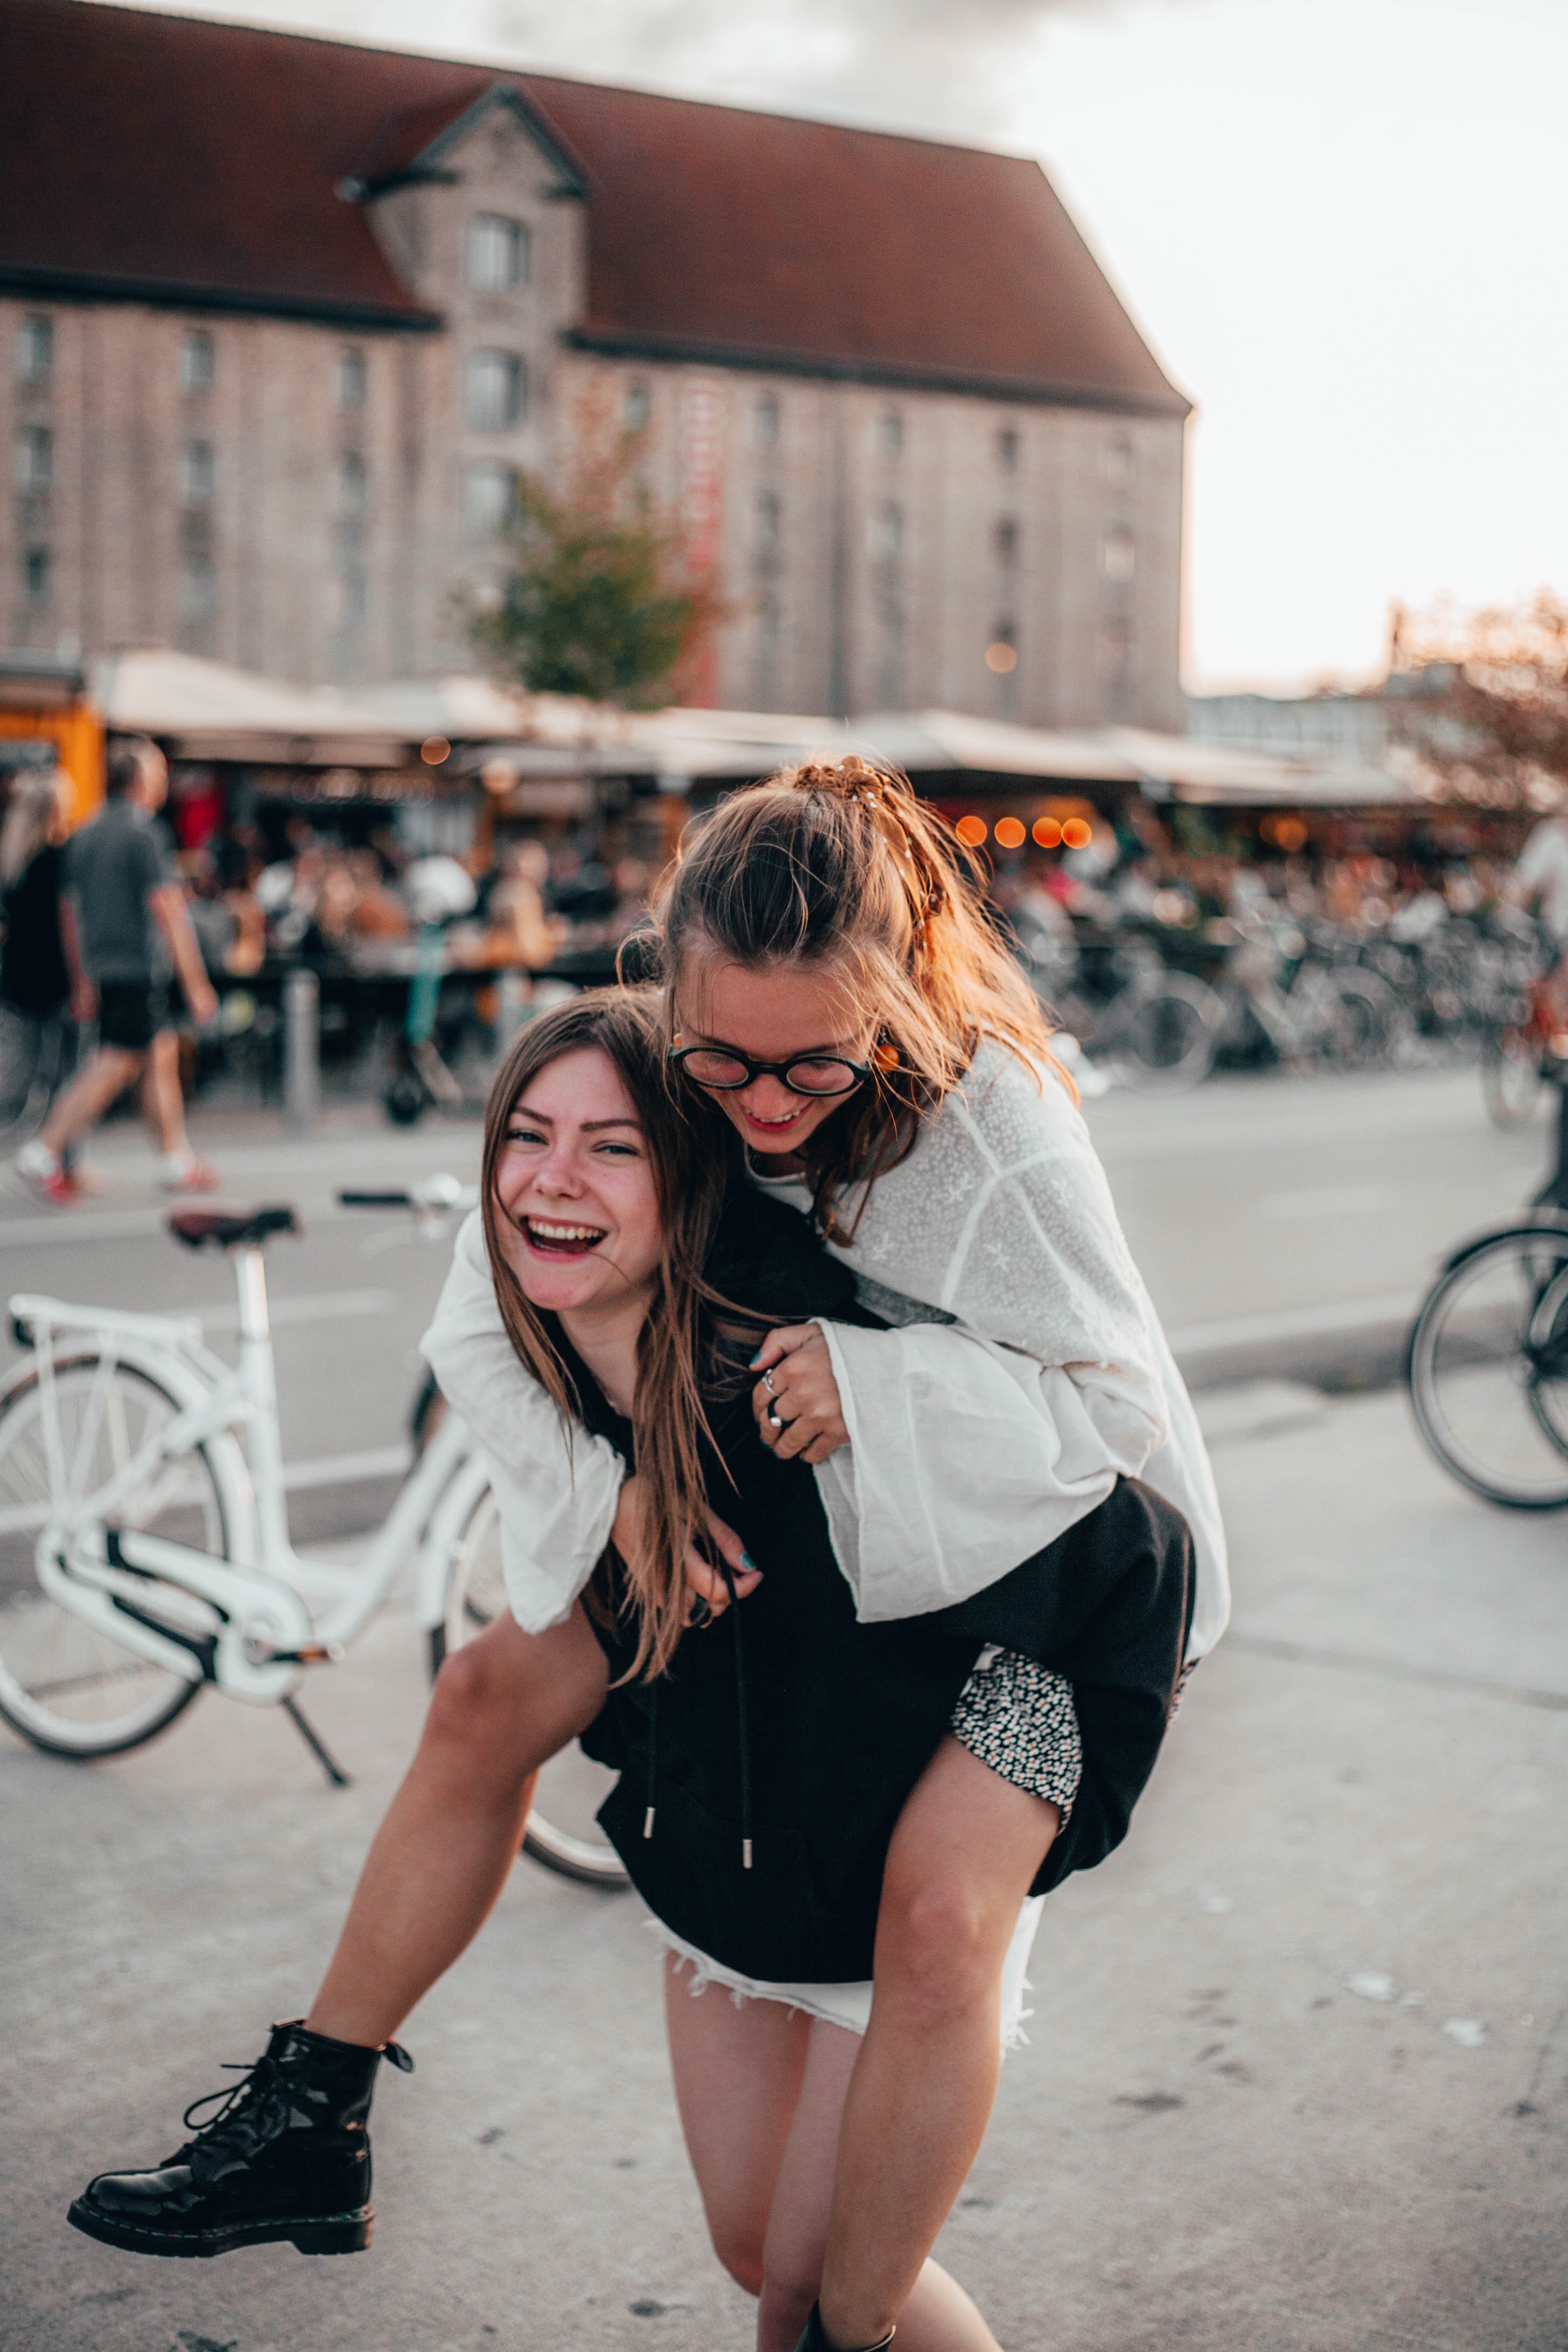 Alice and Molly were best friends in college. | Source: Unsplash